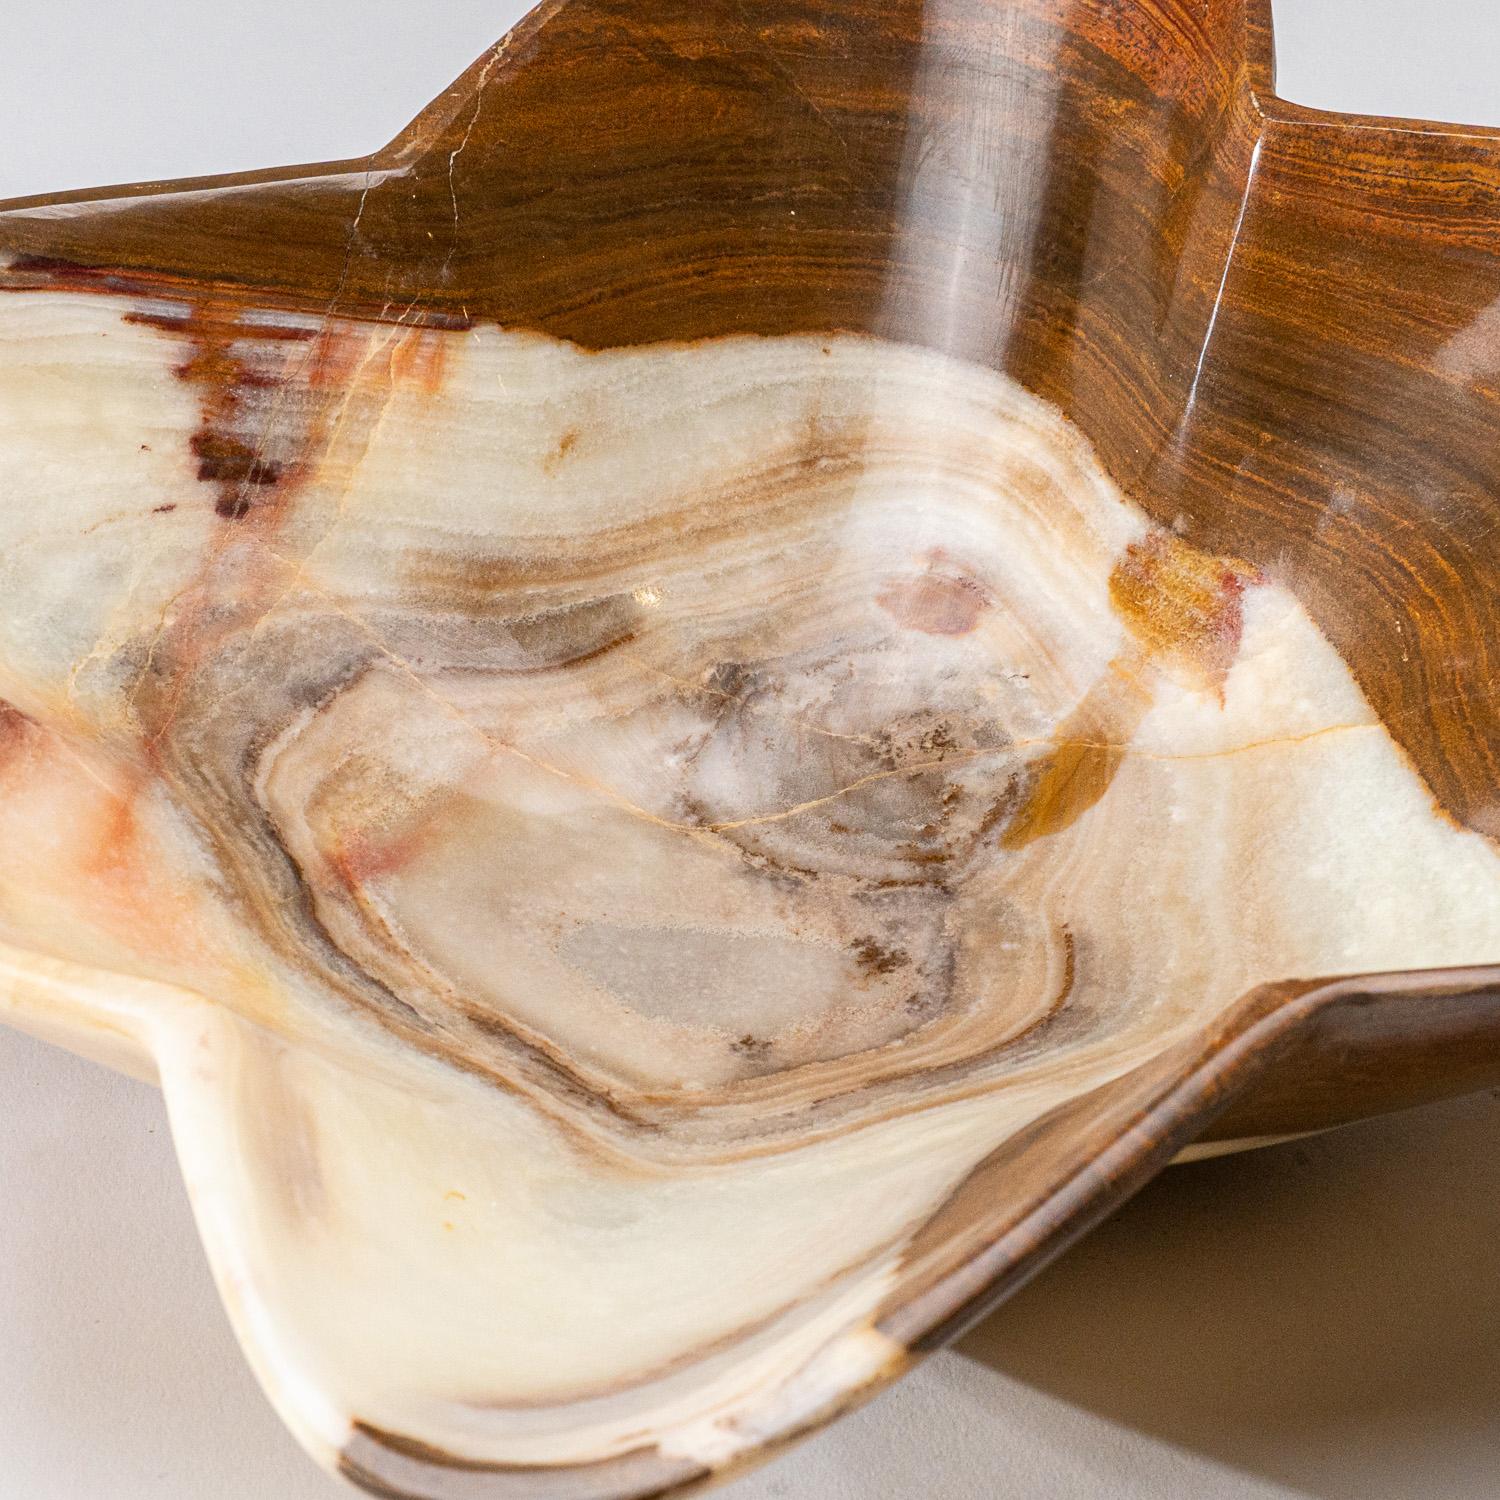 One-of-a-kind, solid mid sized free-form natural onyx decorative bowl carved out of a single chunk of banded natural onyx. This incredible piece is polished to a mirror finish. This unique piece blends natural onyx shades of green, white, honey and